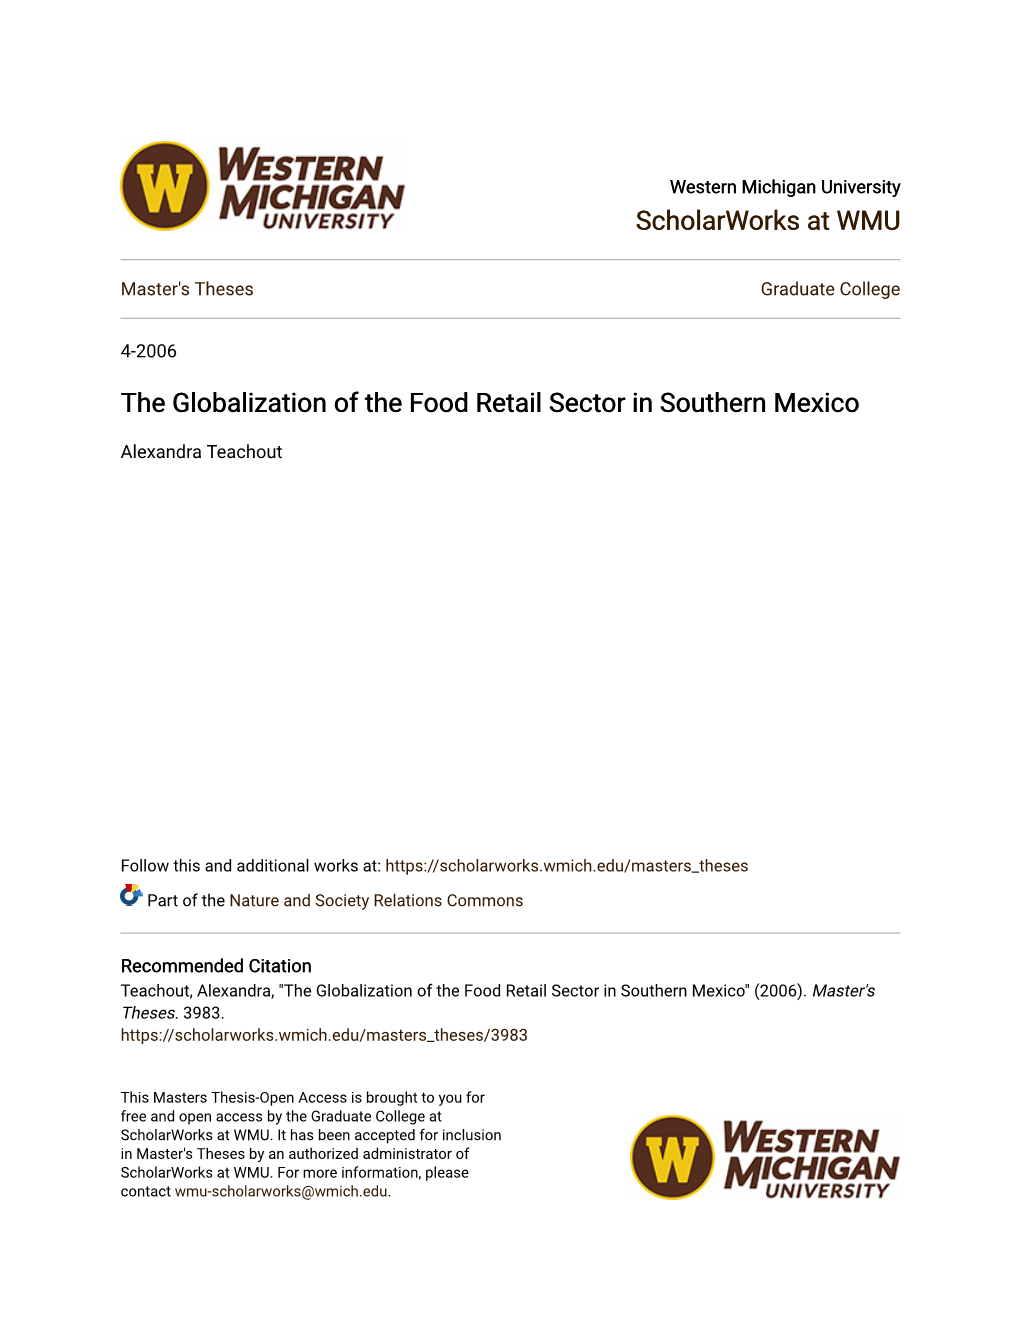 The Globalization of the Food Retail Sector in Southern Mexico